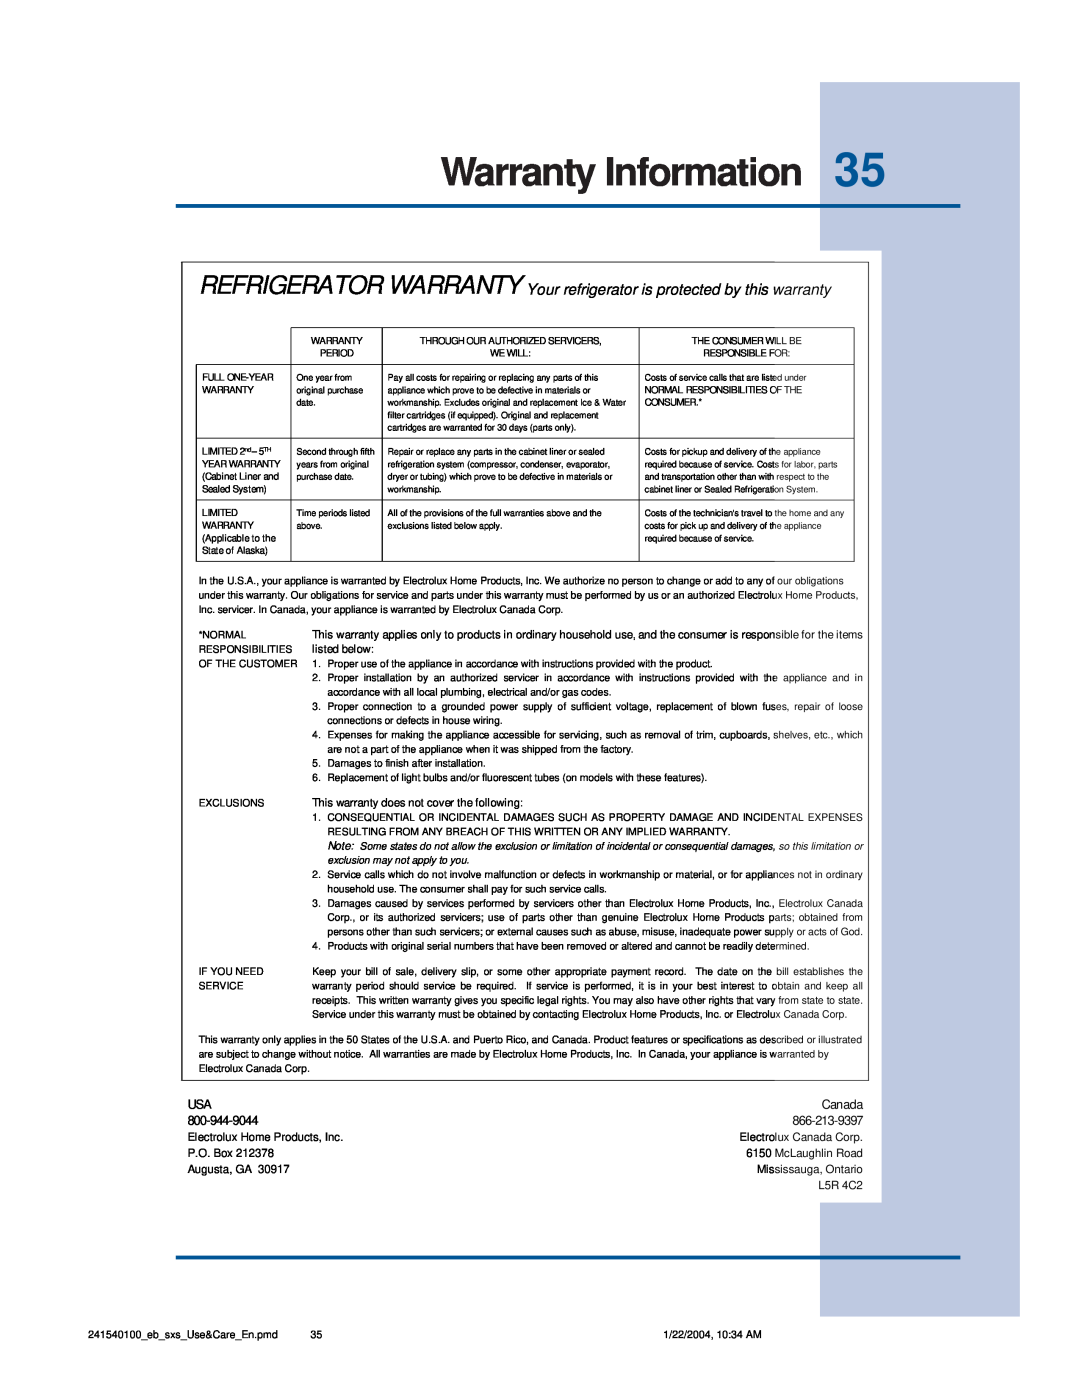 Frigidaire 241540100 (1203) Warranty Information, Electrolux Home Products, Inc, Electrolux Canada Corp, P.O. Box 